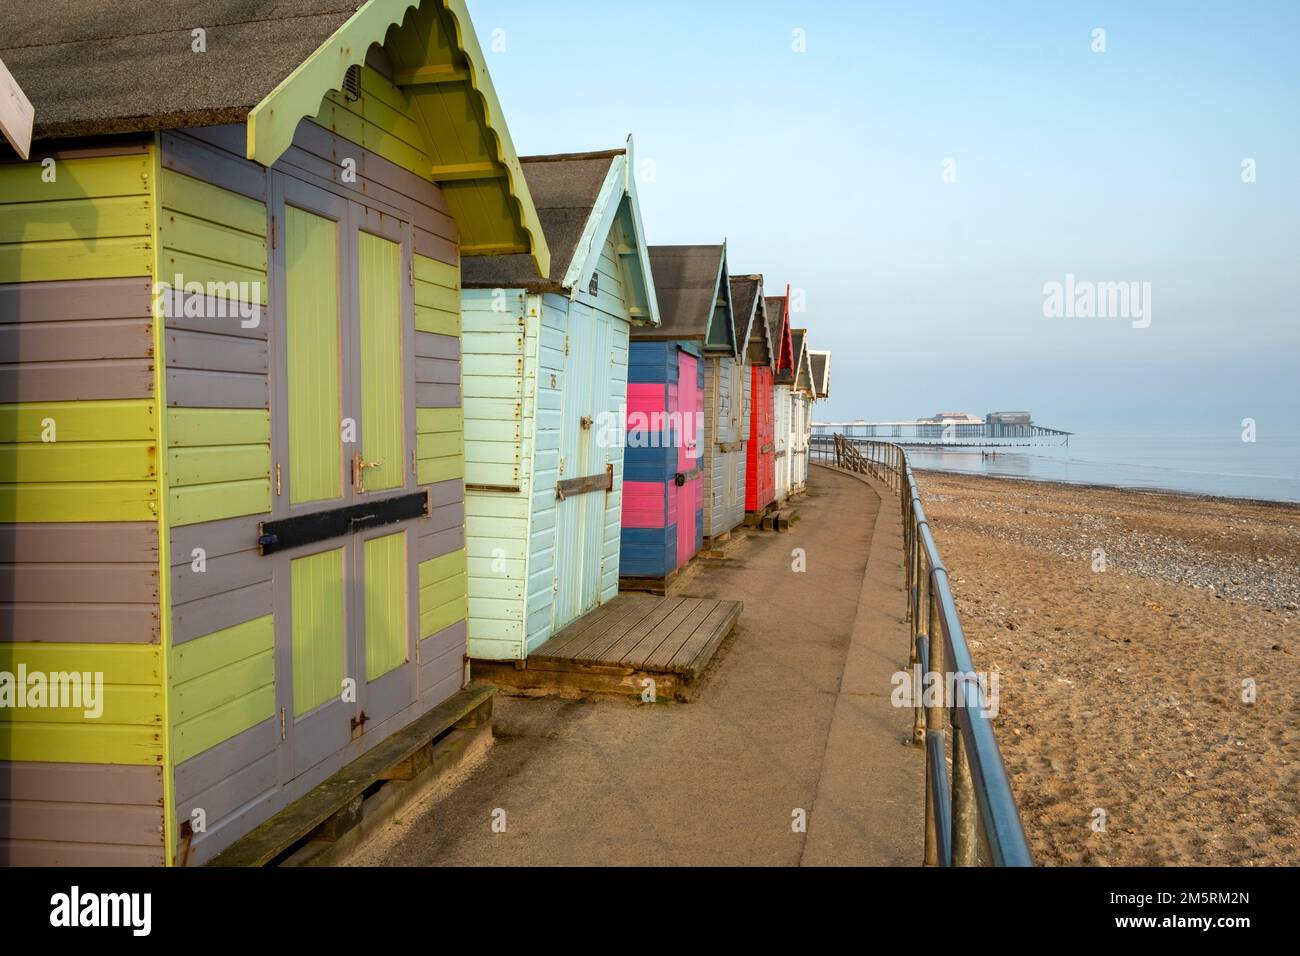 Colourful Beach huts on the beach at Cromer, Norfolk Stock Photo